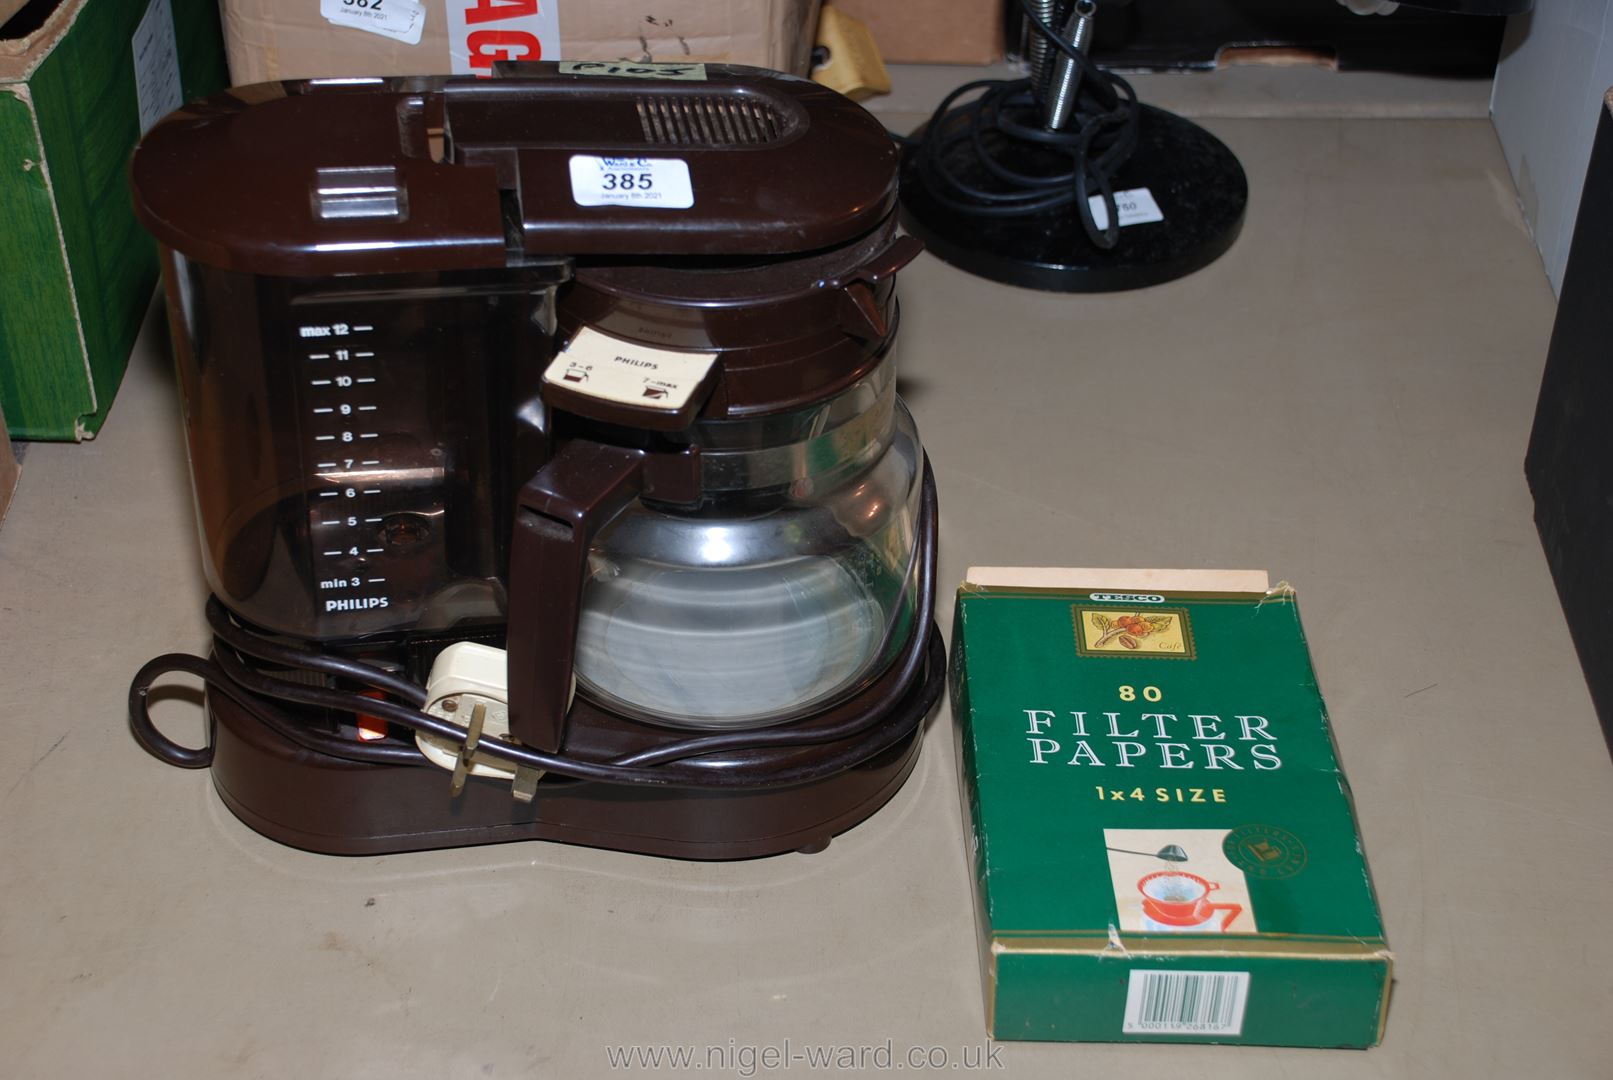 A "Phillips" coffee machine and paper filters.